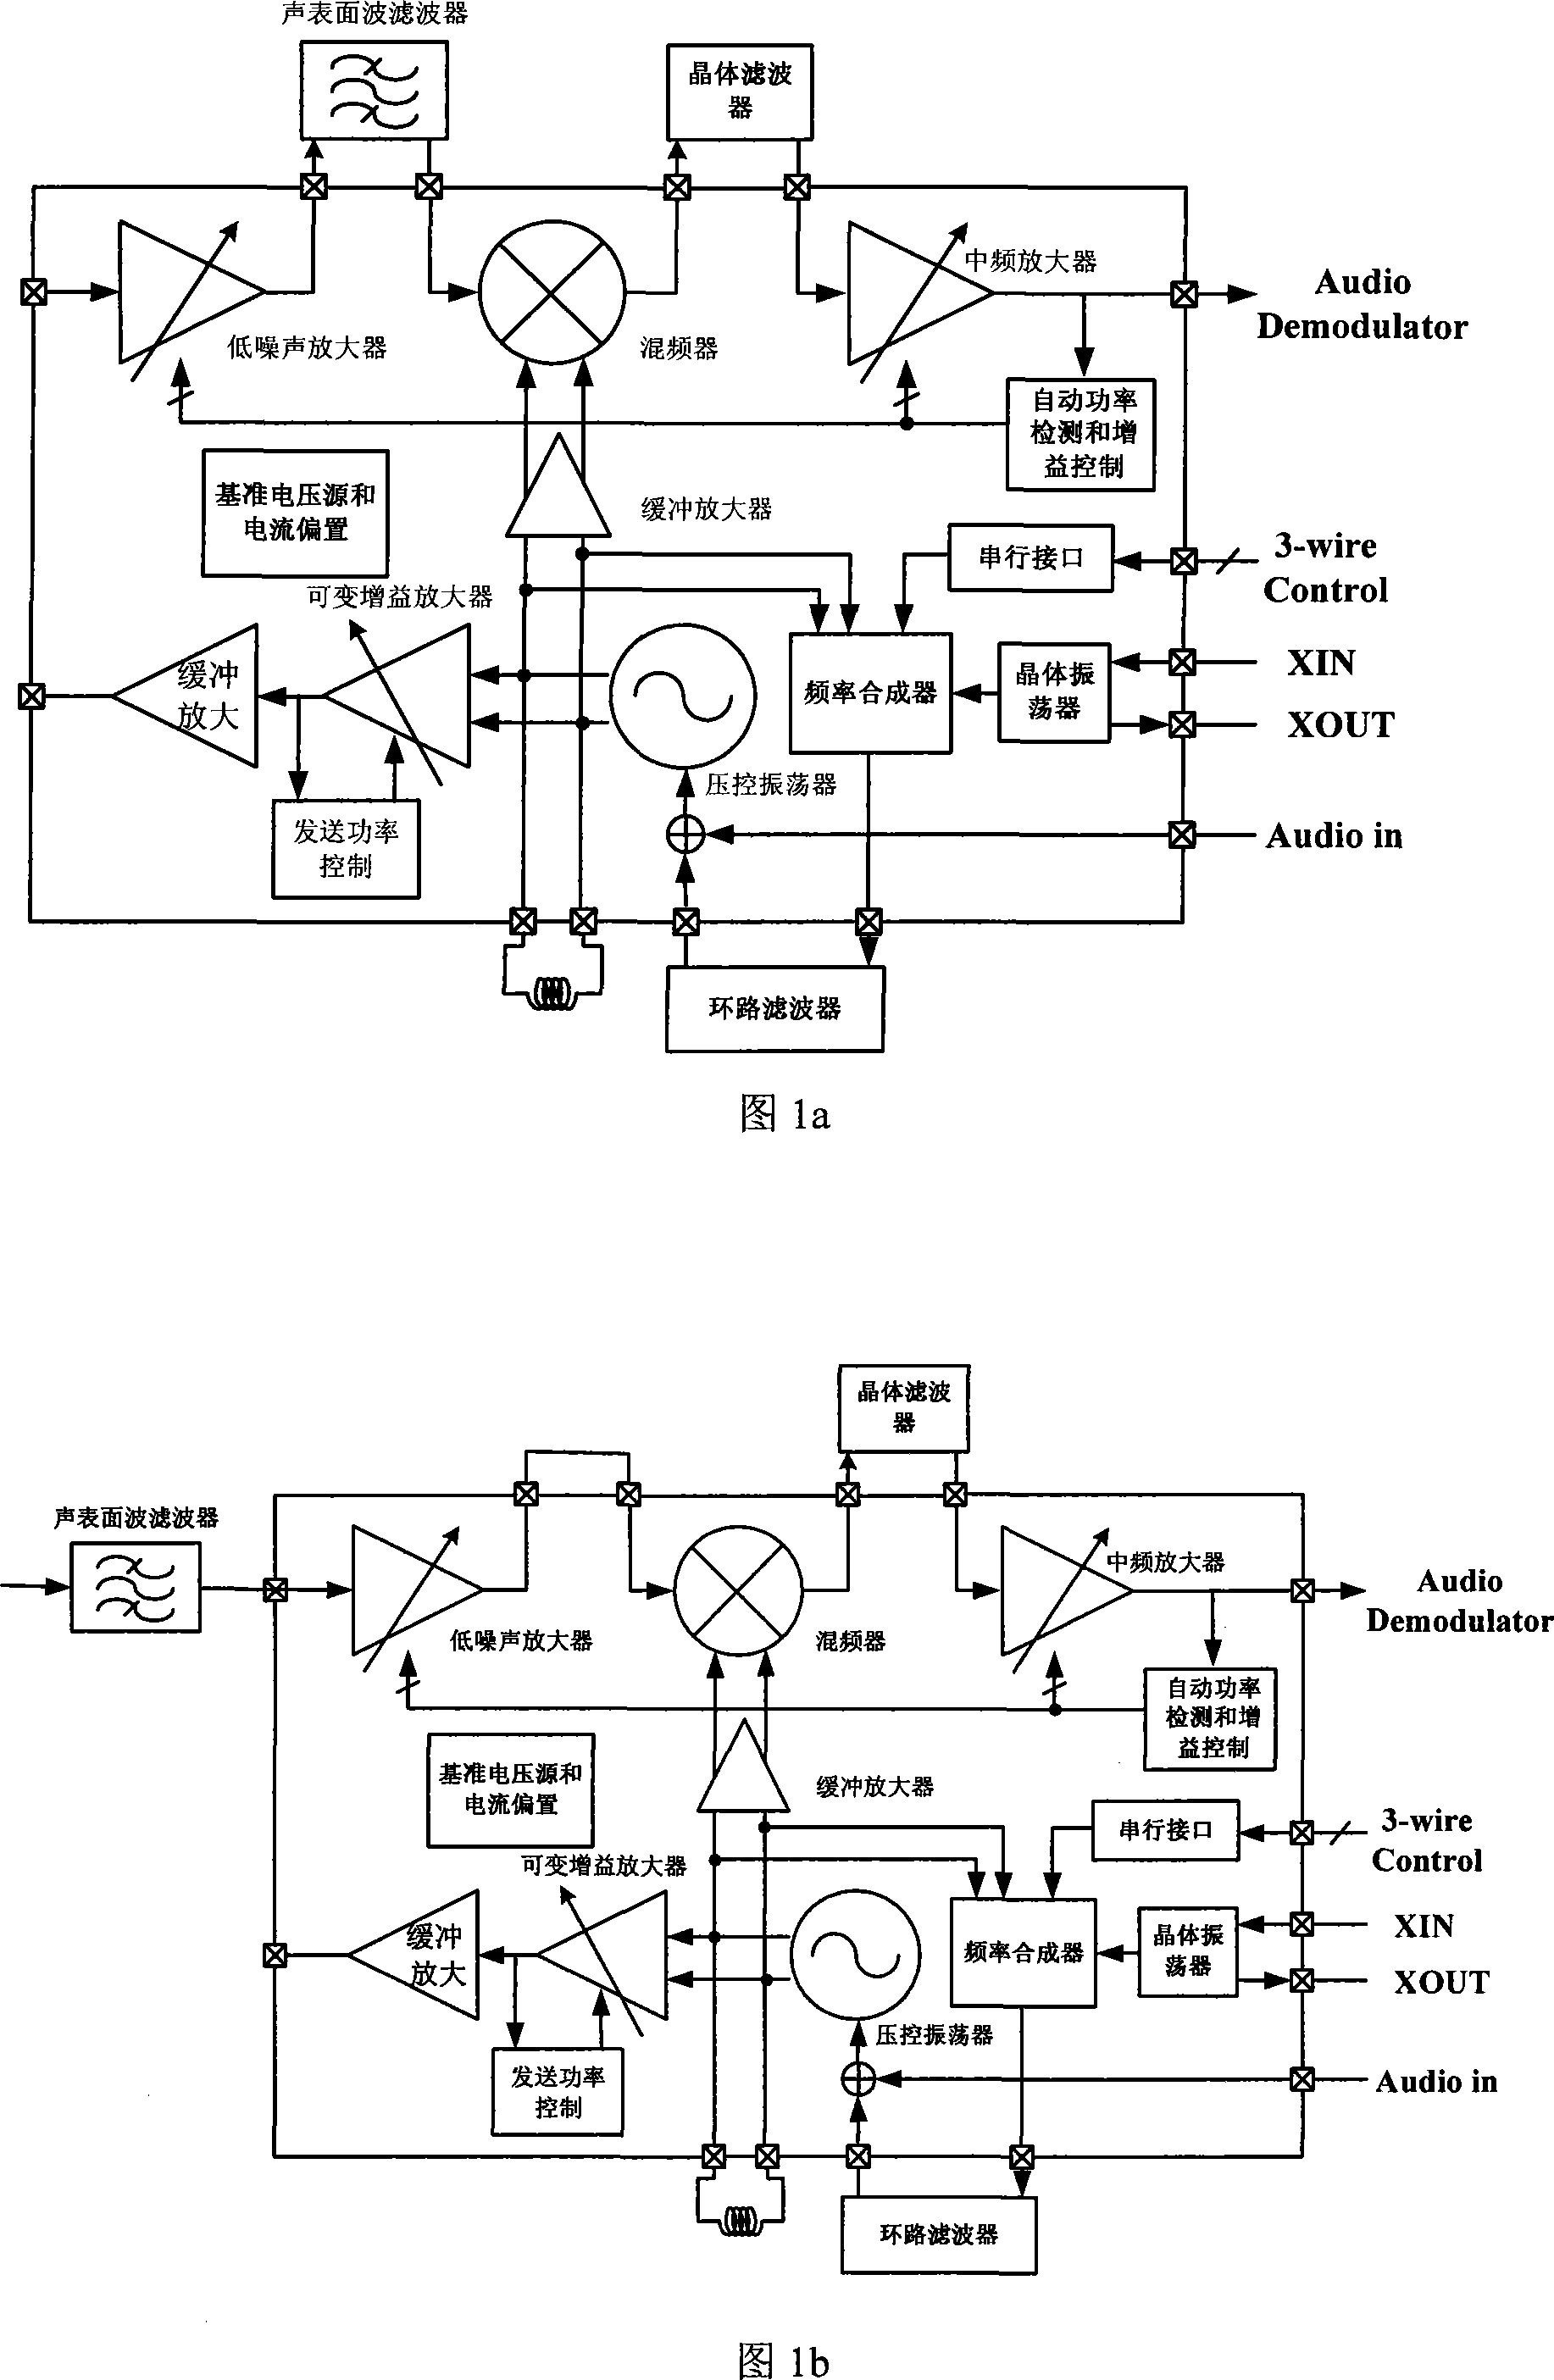 Single chip radio frequency transceiver